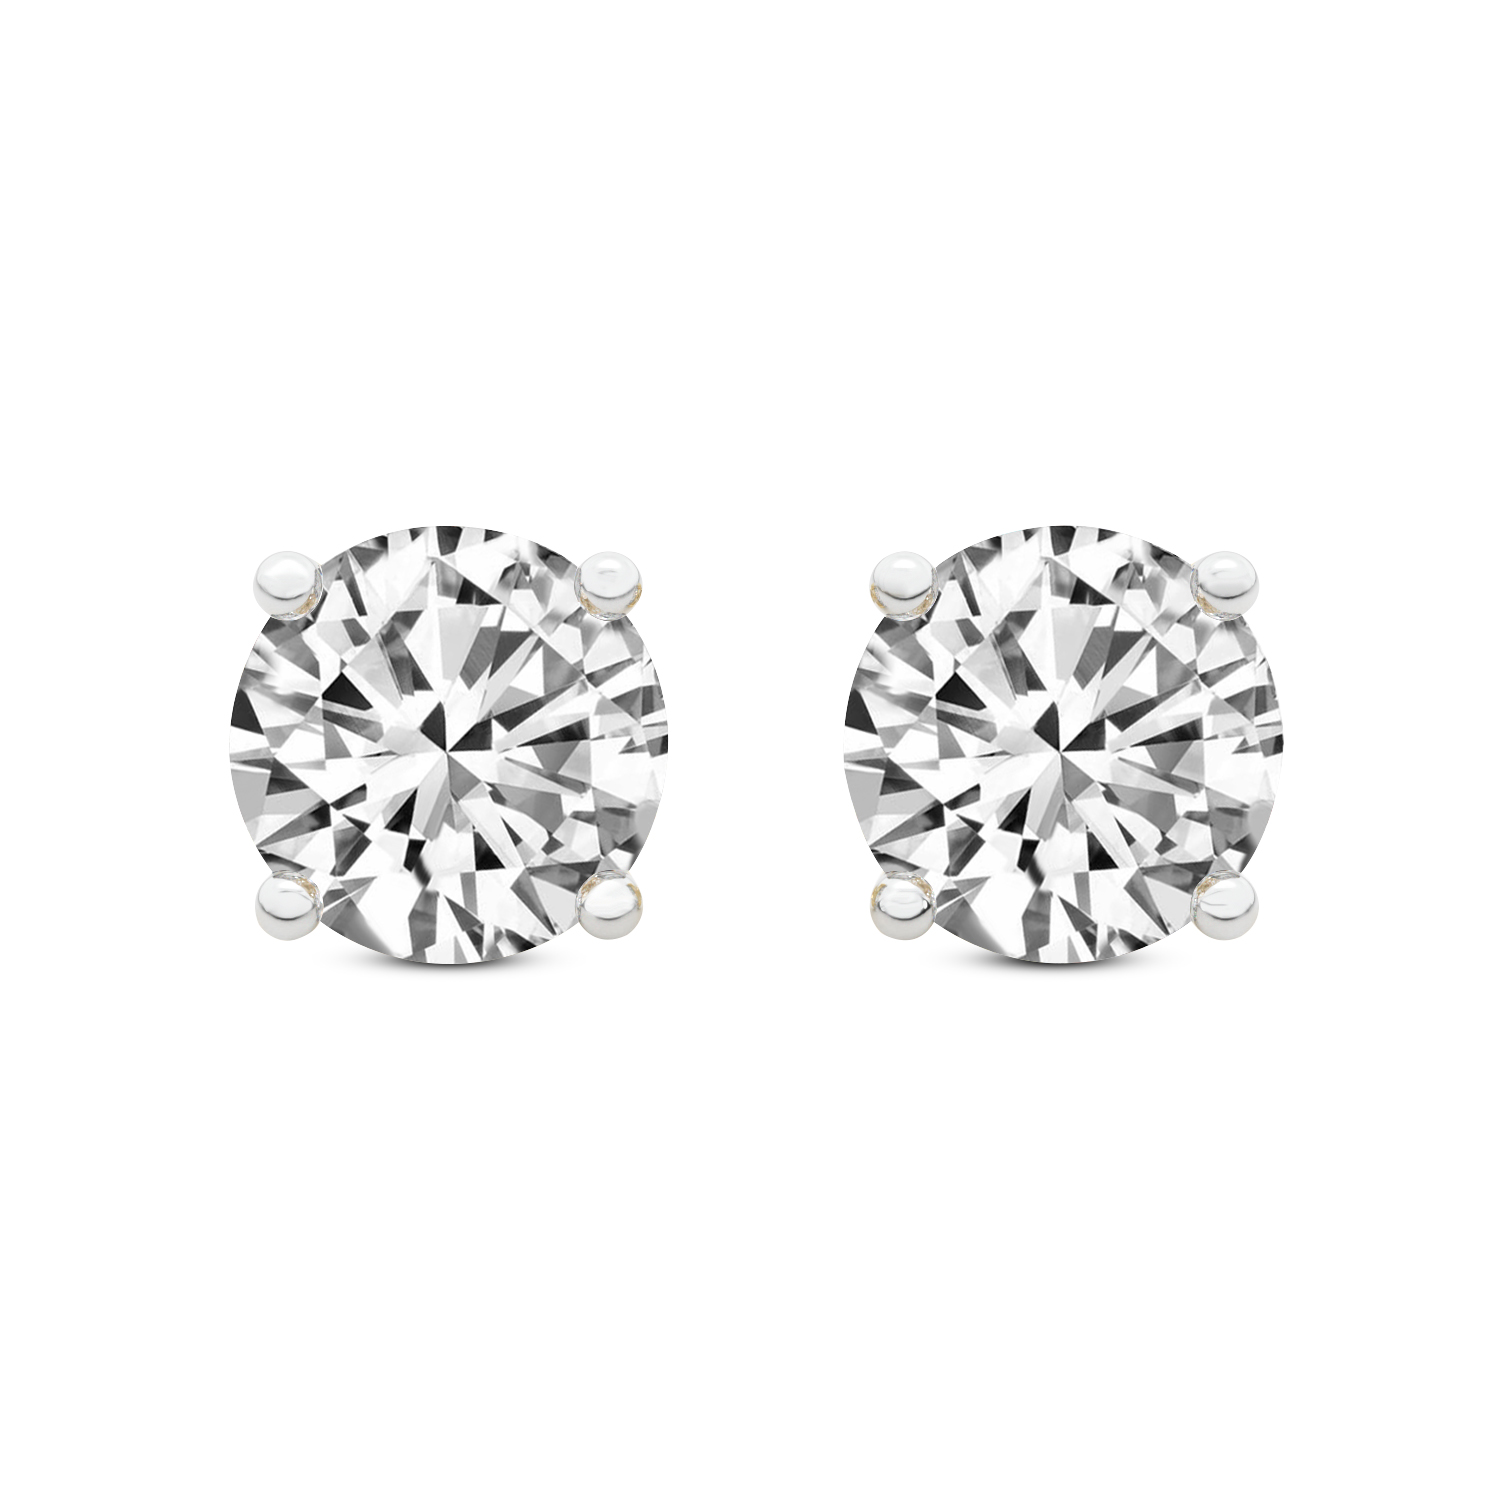 4 Prong Round Lab Diamond Stud Earrings yellow gold earring, small front view